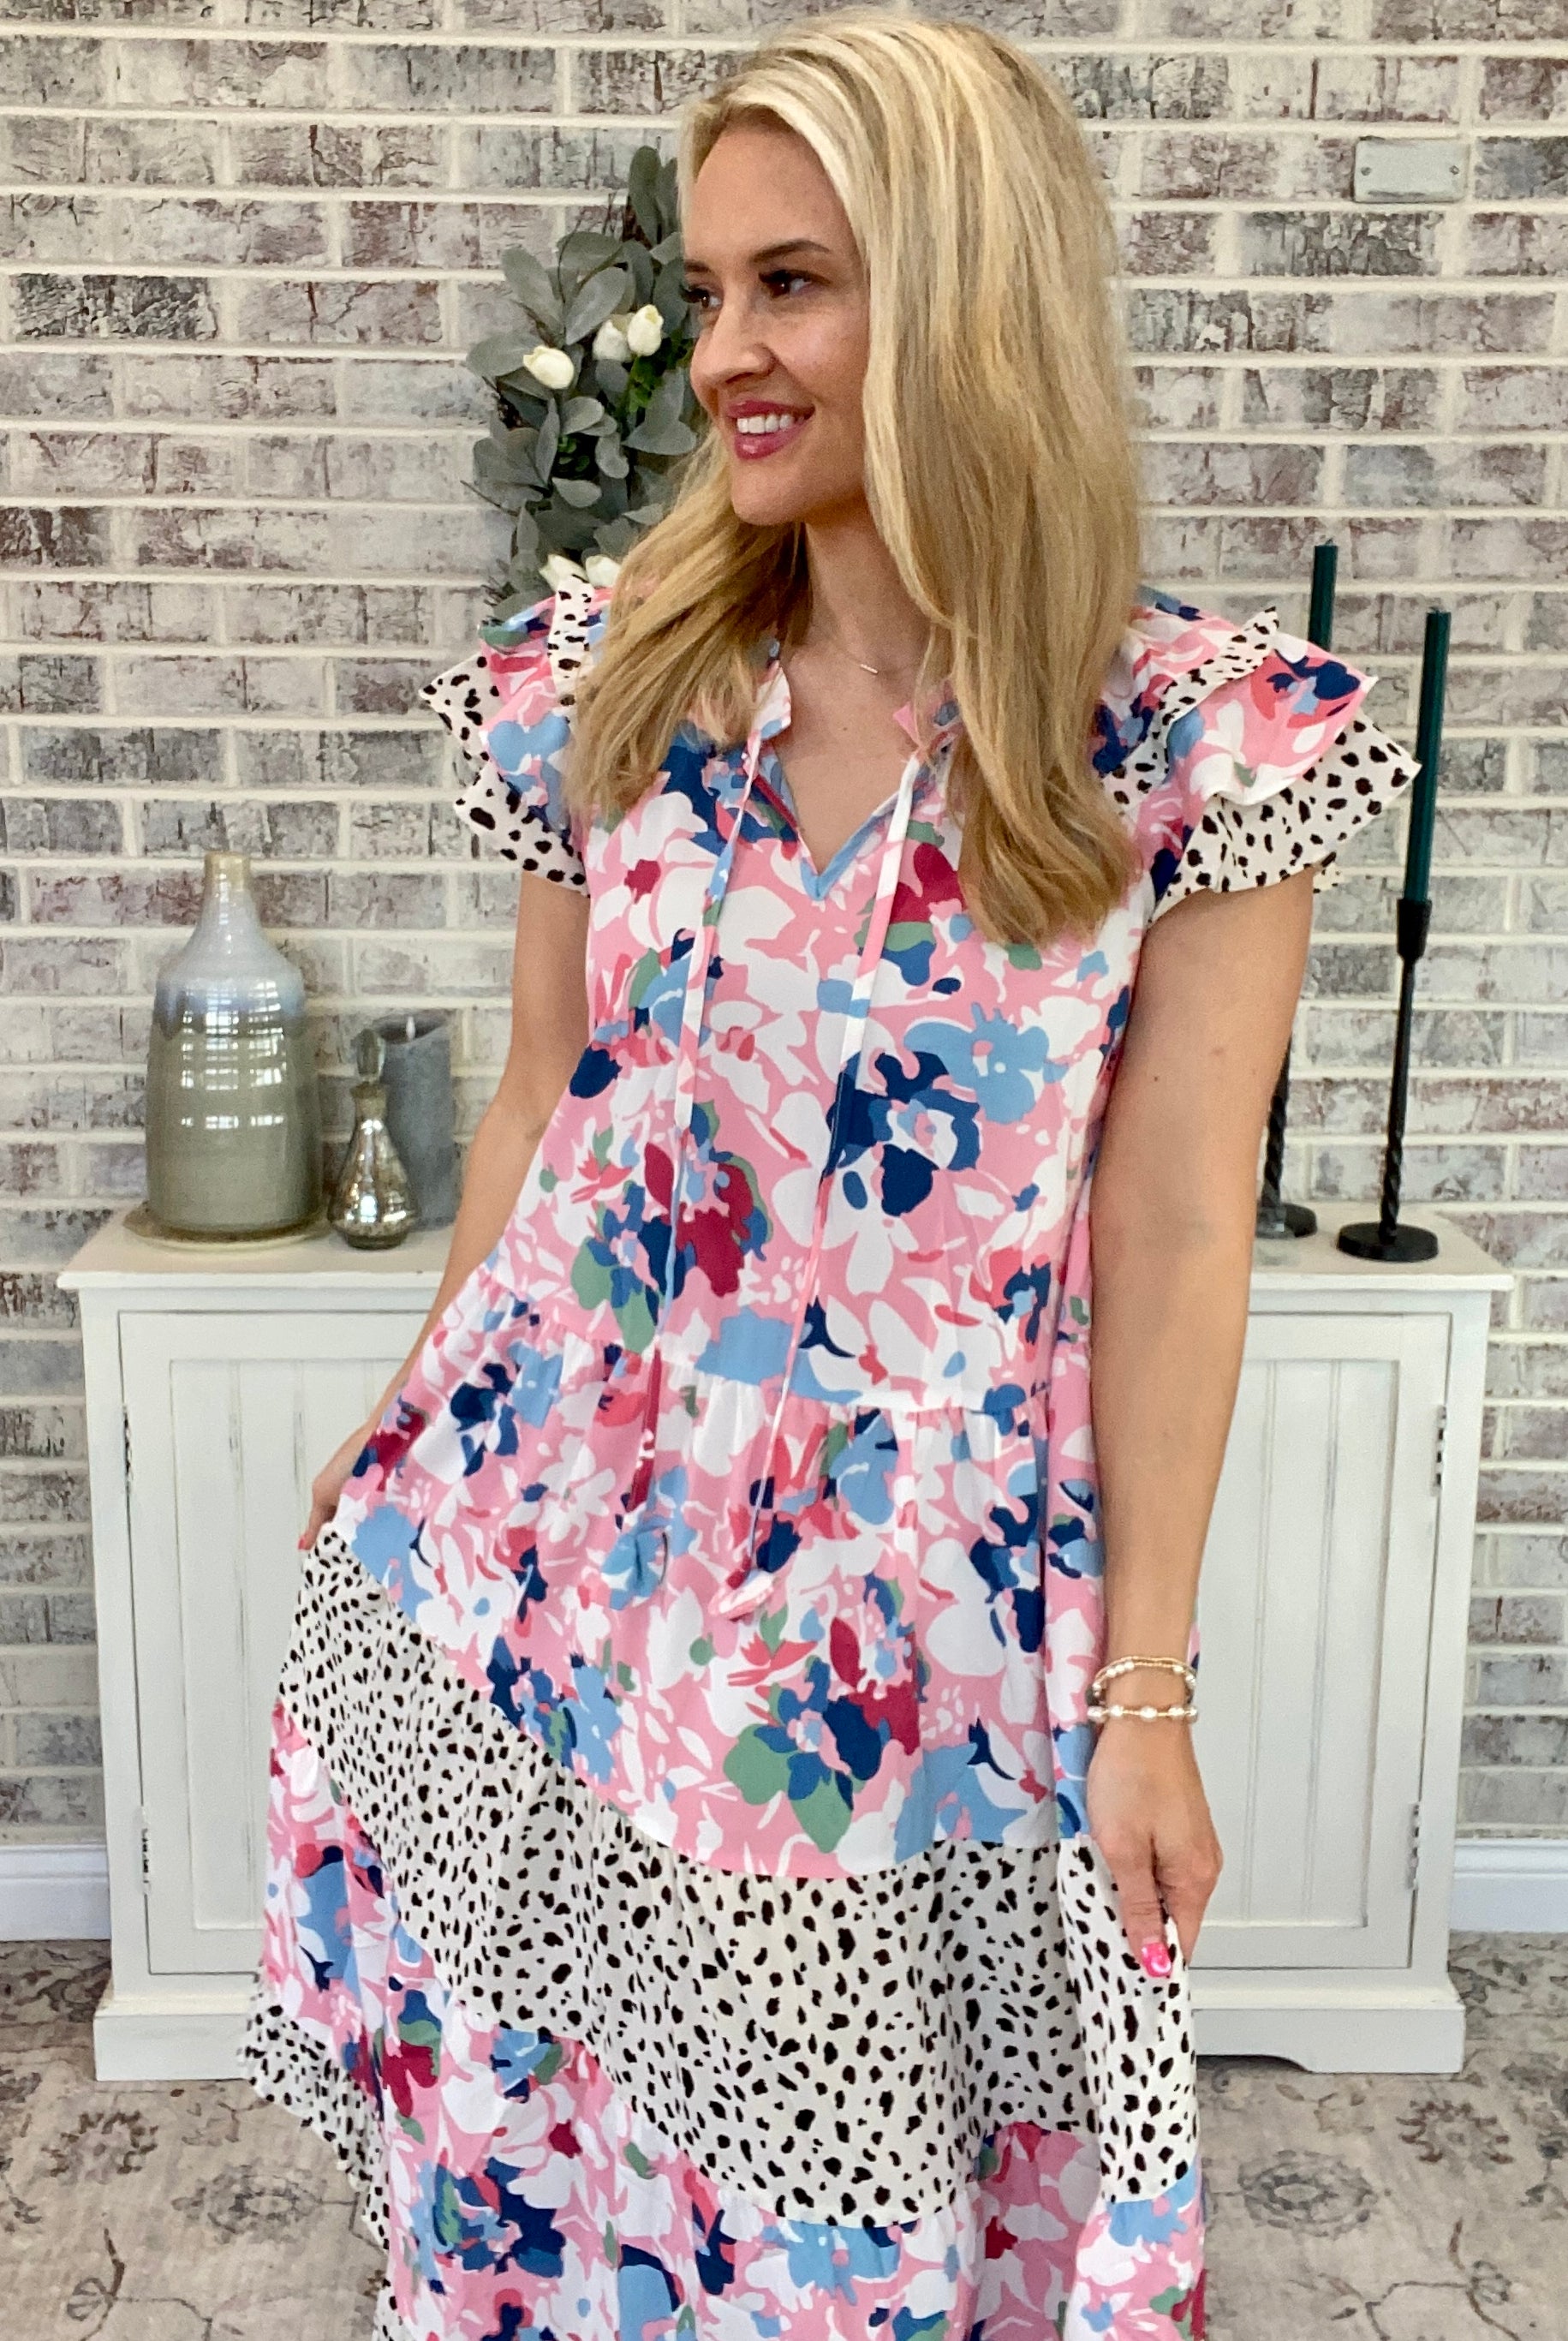 FINAL SALE Multi Pattern Midi Dress-Dresses-The Lovely Closet-The Lovely Closet, Women's Fashion Boutique in Alexandria, KY